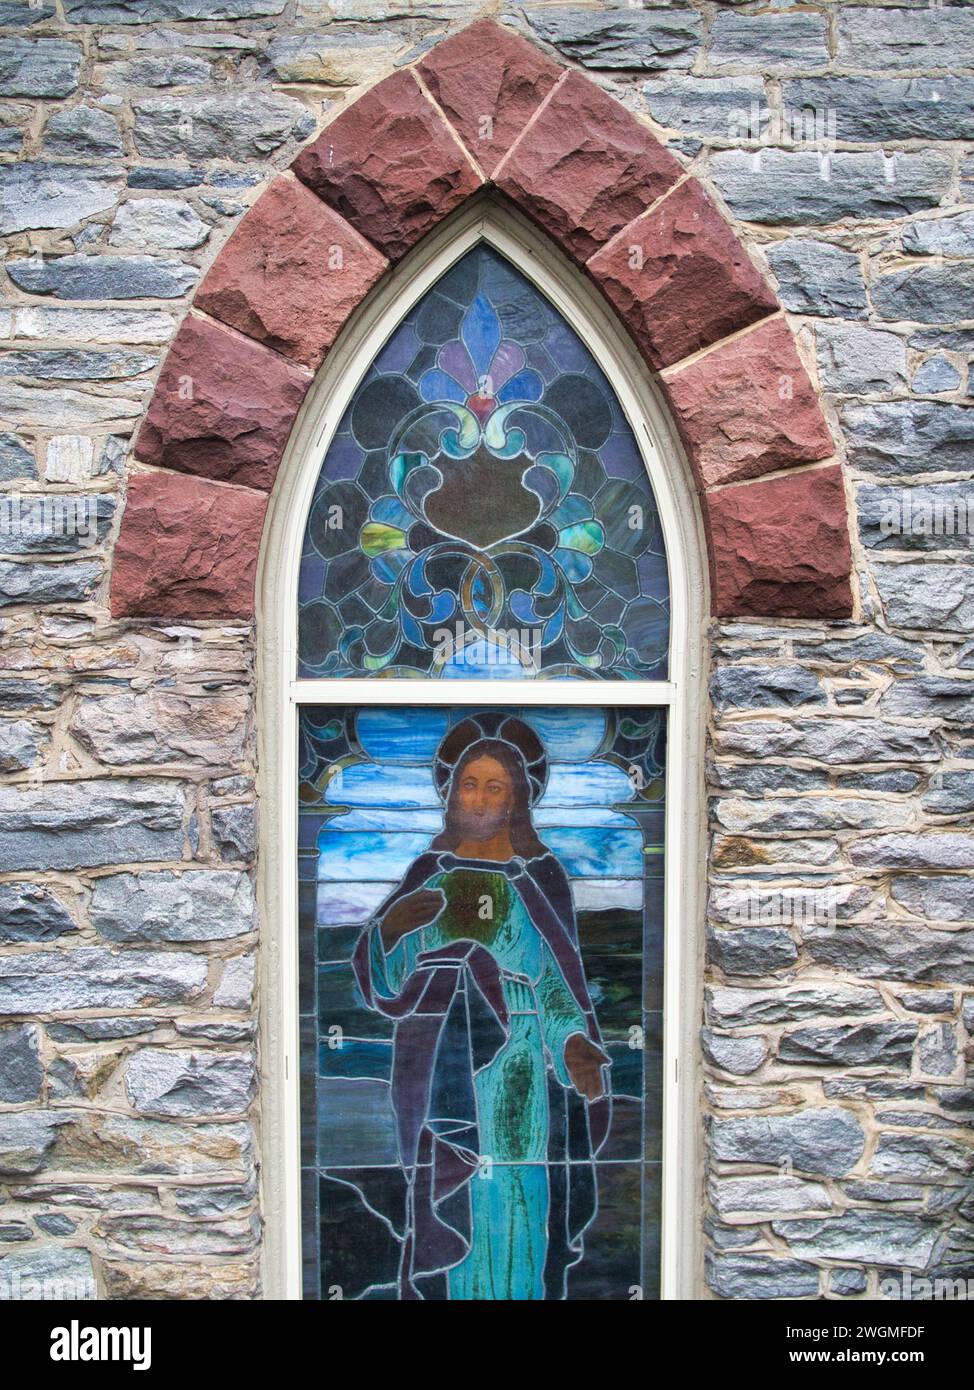 Stained glass depiction of Jesus Christ in arched window of Roman Catholic Church in Harpers Ferry, WV. Stock Photo